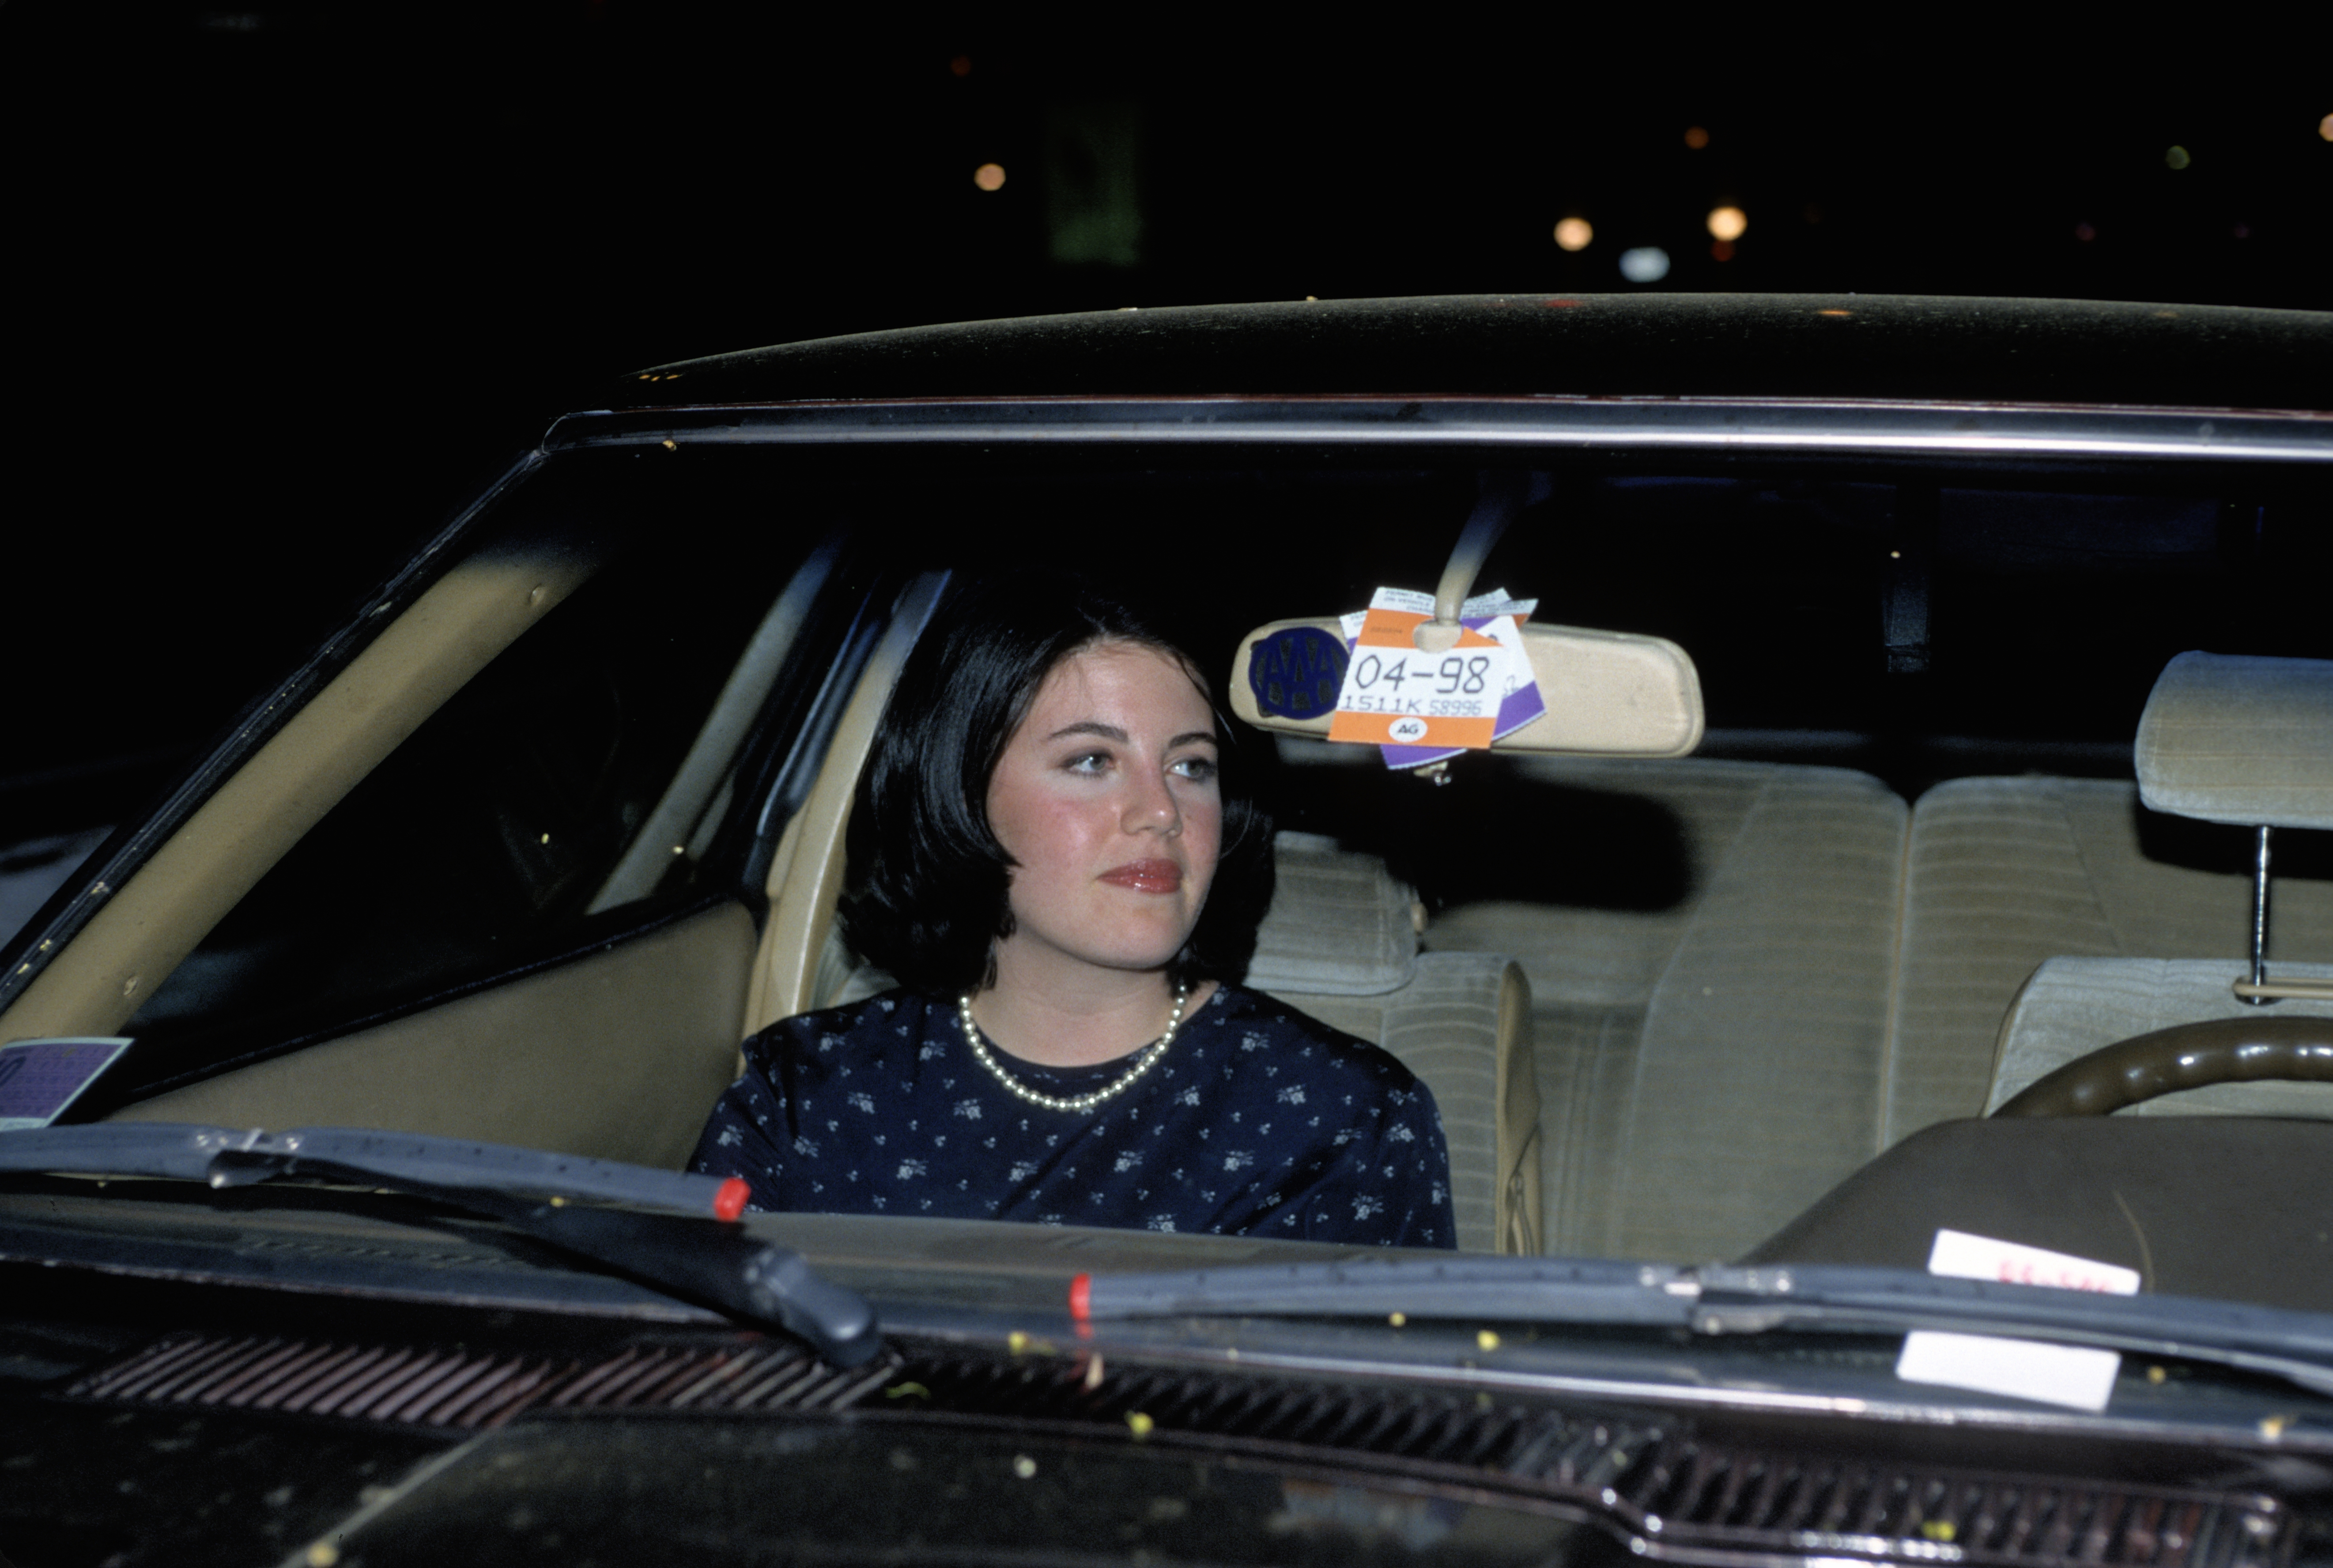 Monica Lewinsky rides in car on August 6, 1998 in Washington D.C. | Source: Getty Images